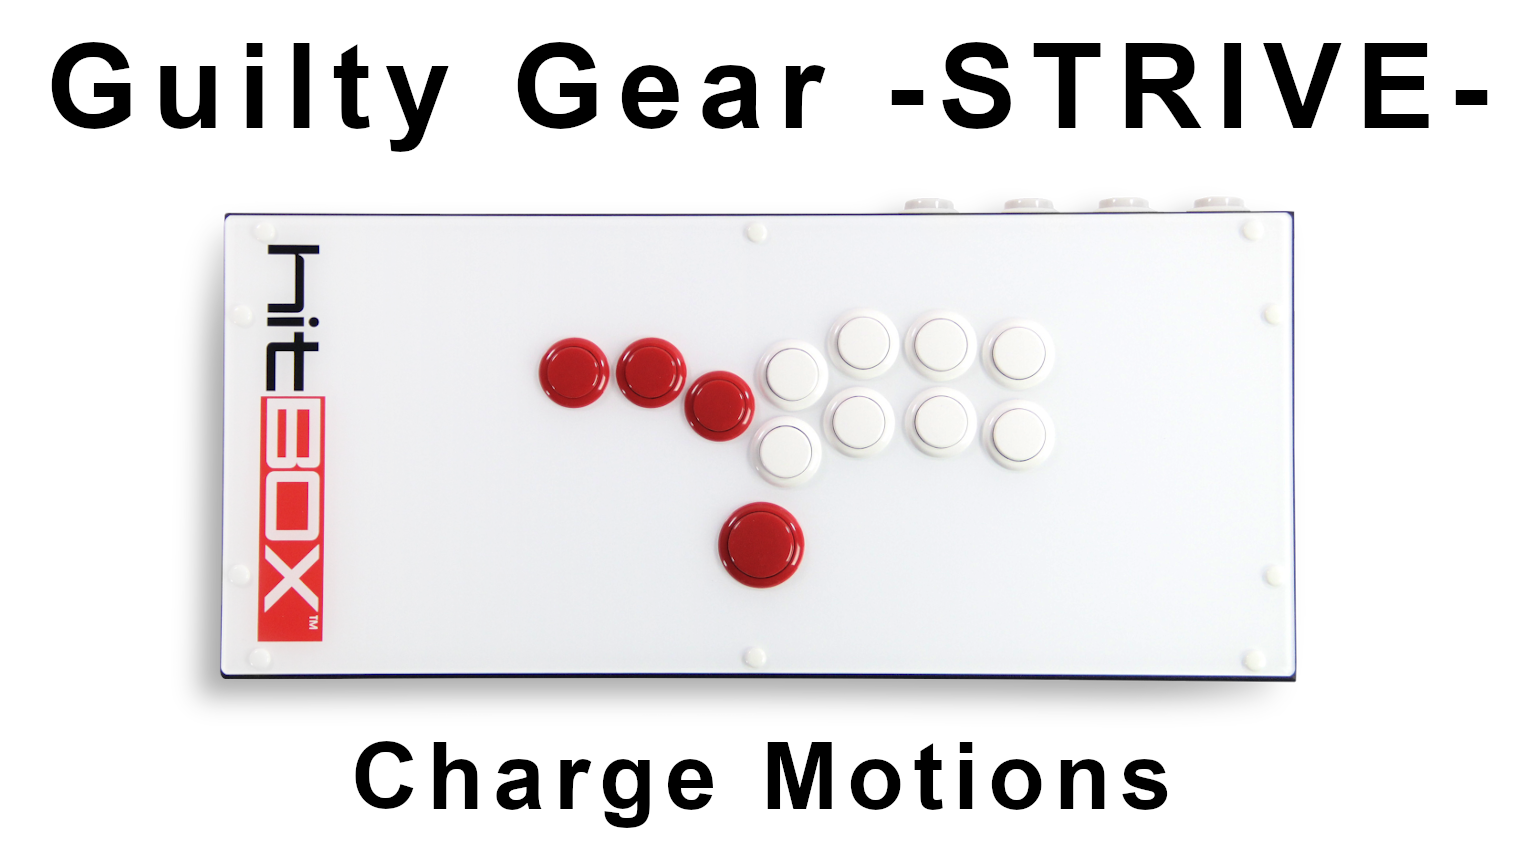 Guilty Gear -STRIVE- on Hit Box - Charge Motions